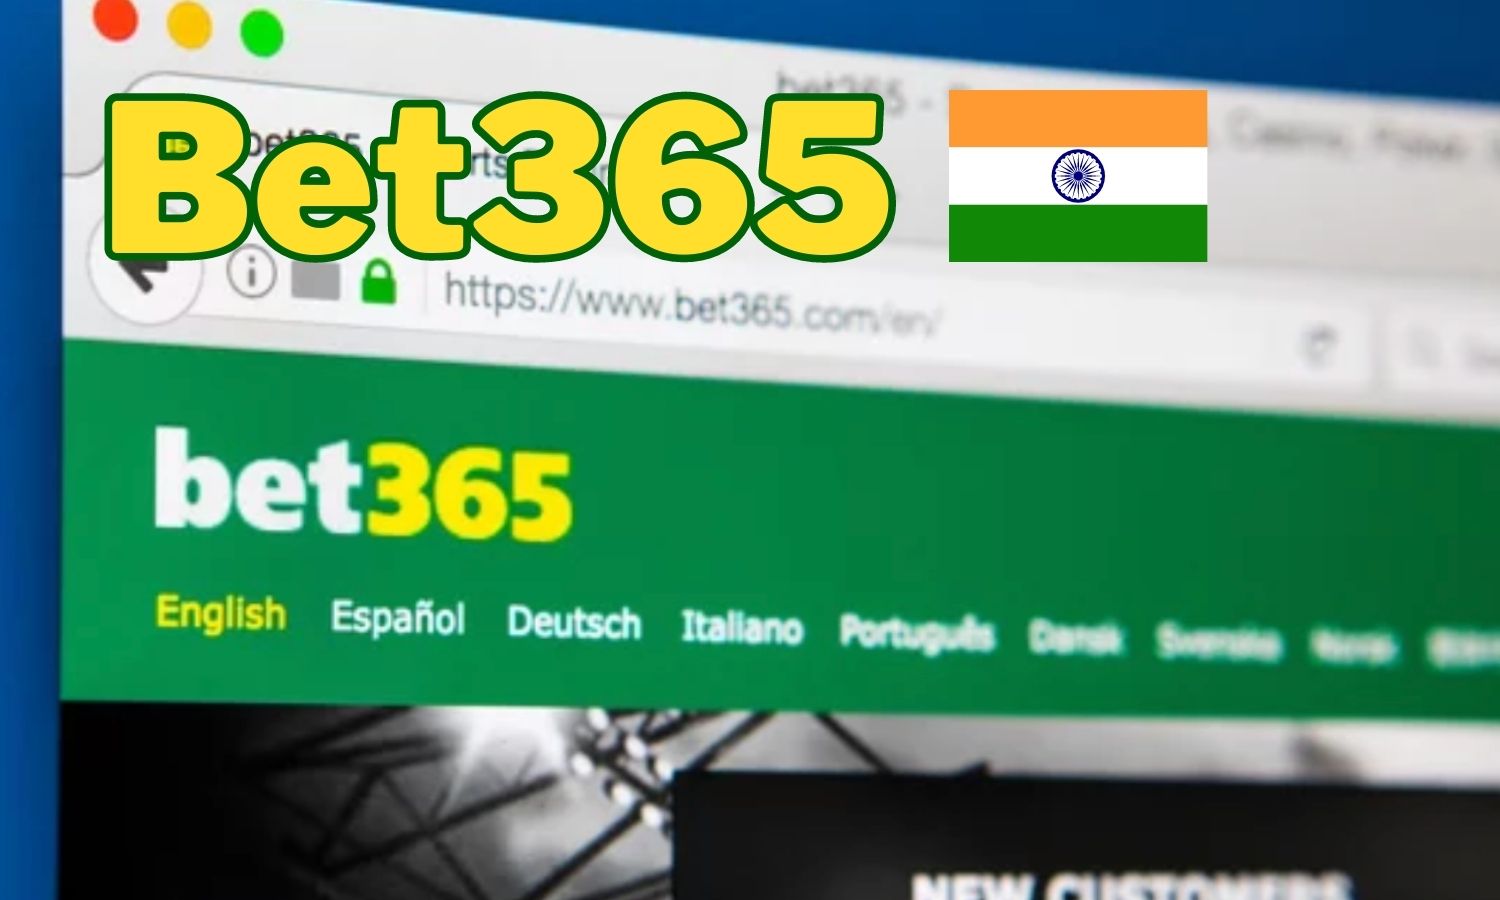 How to Use Bet365 in India?